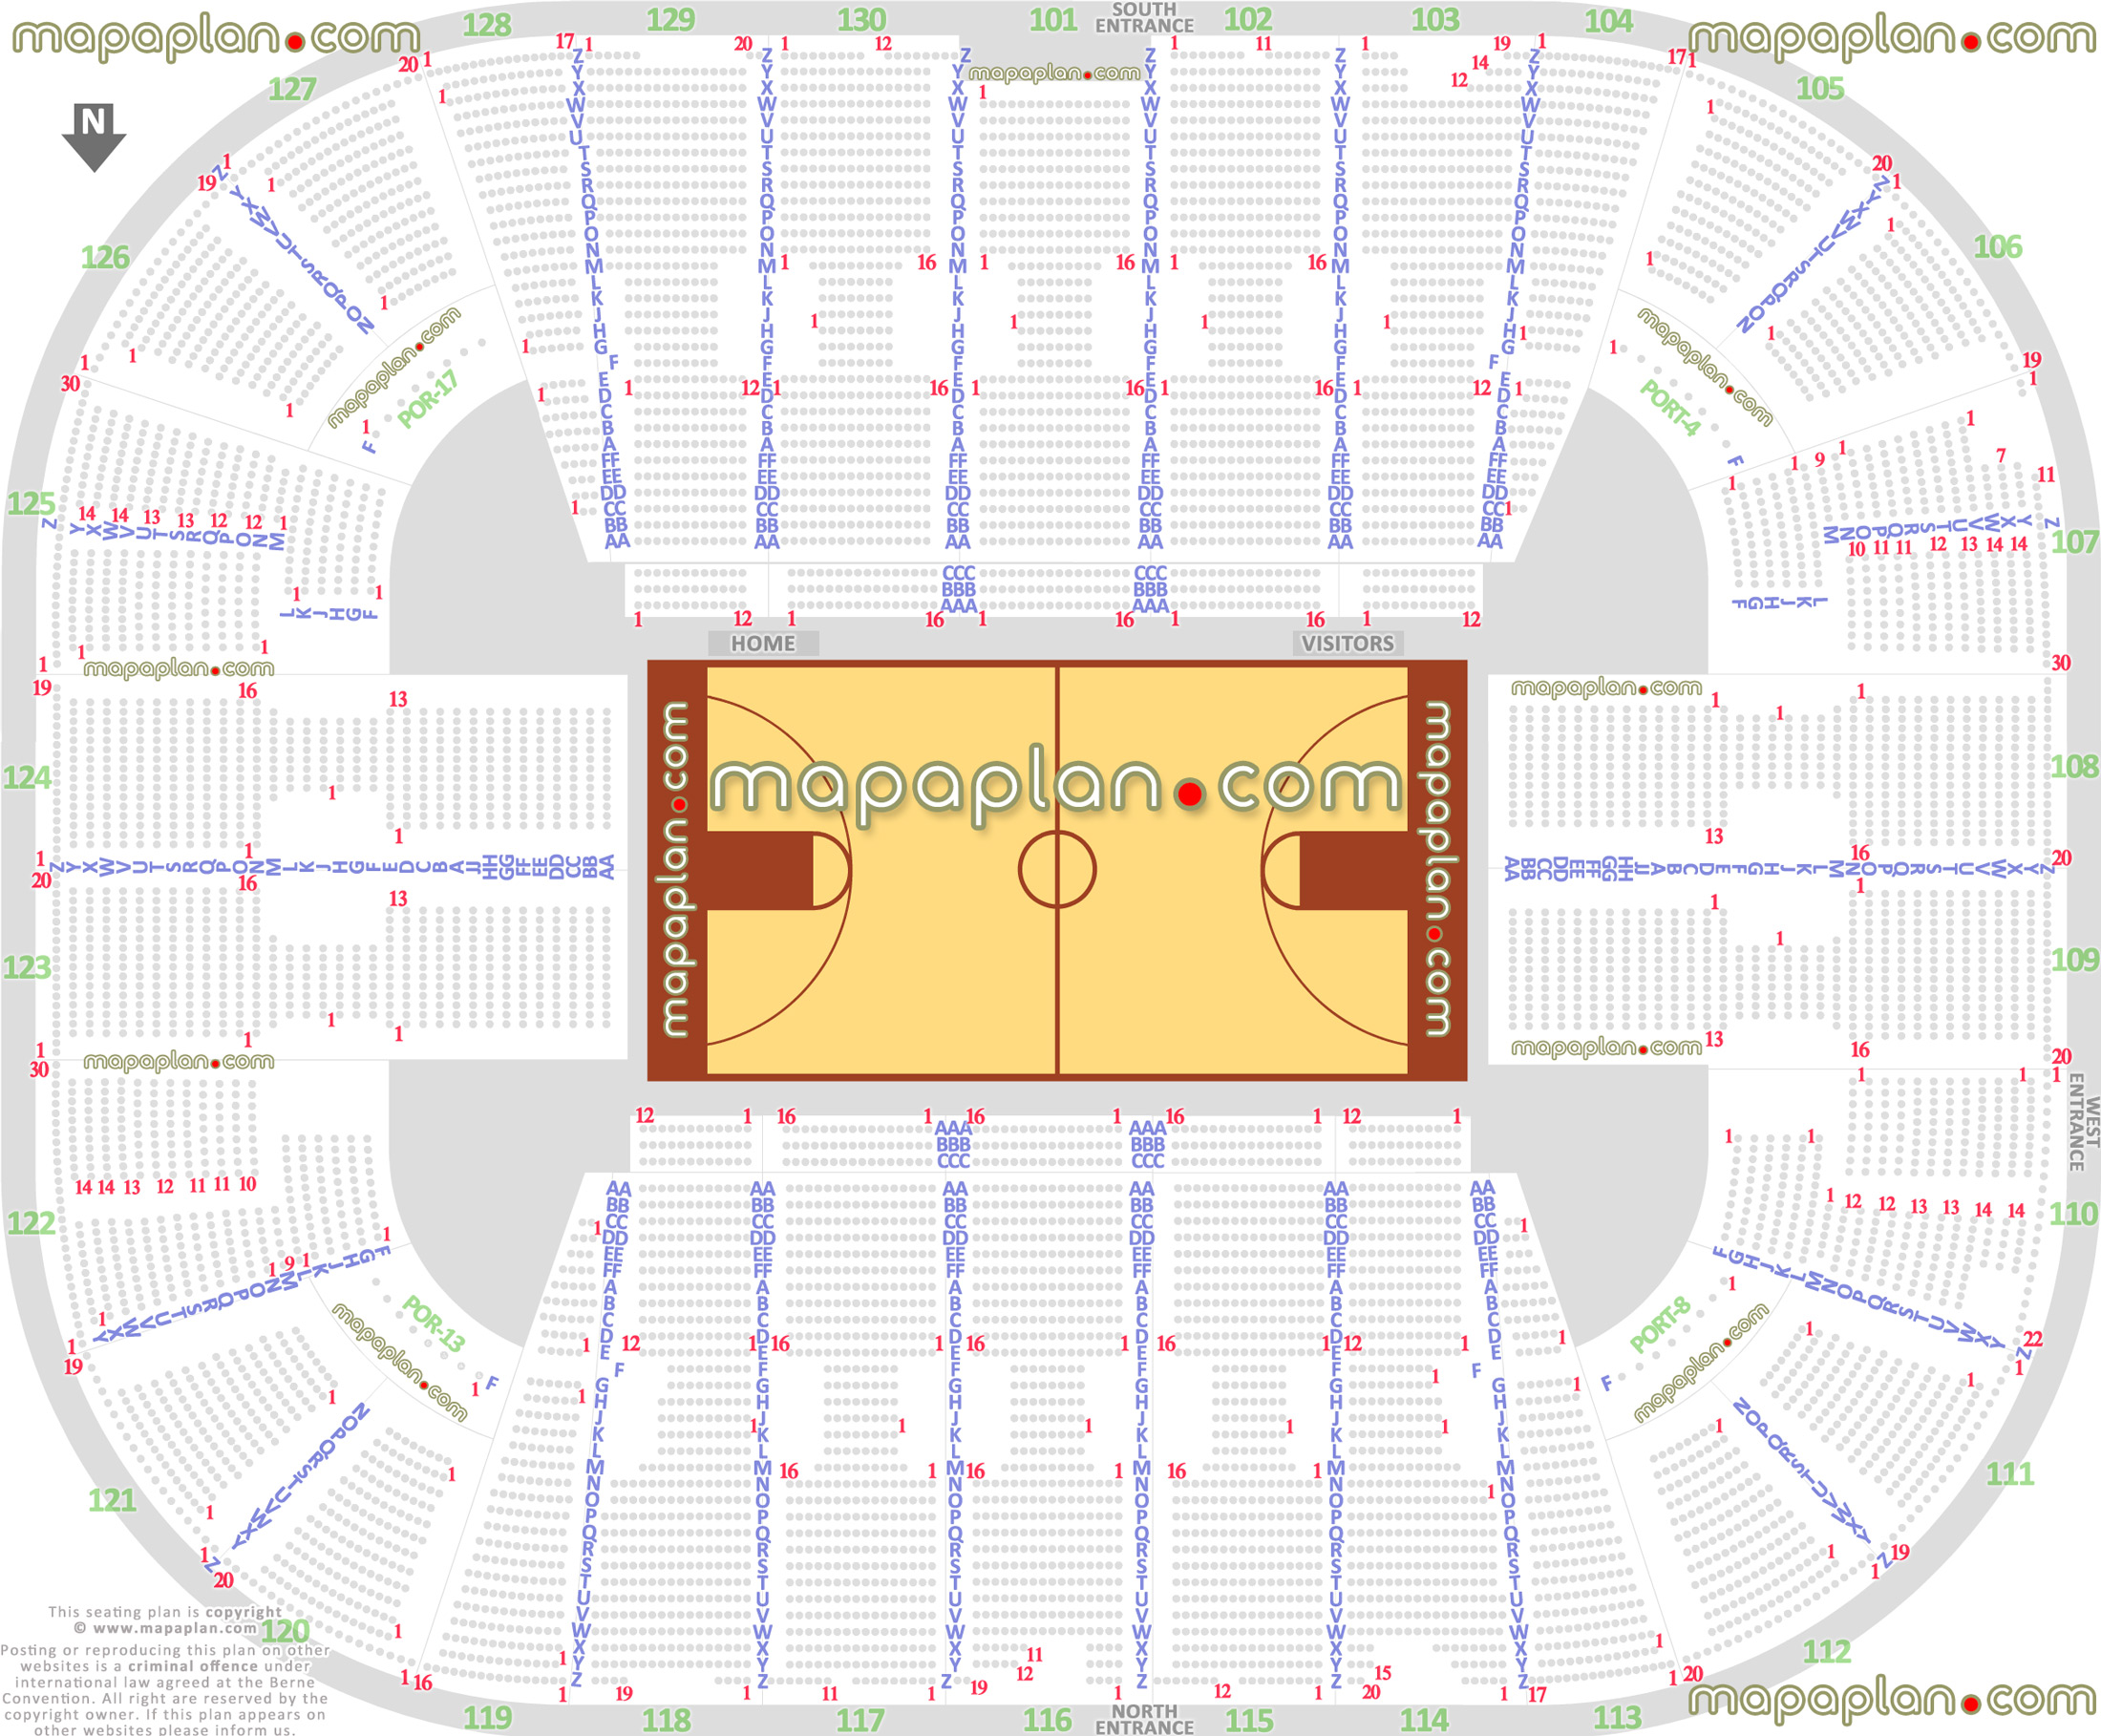 george mason university patriots basketball game stadium plan individual find my seat locator chart how concourse level seats rows numbered best seats selection information guide vip rows aaa bbb ccc Fairfax EagleBank Arena seating chart